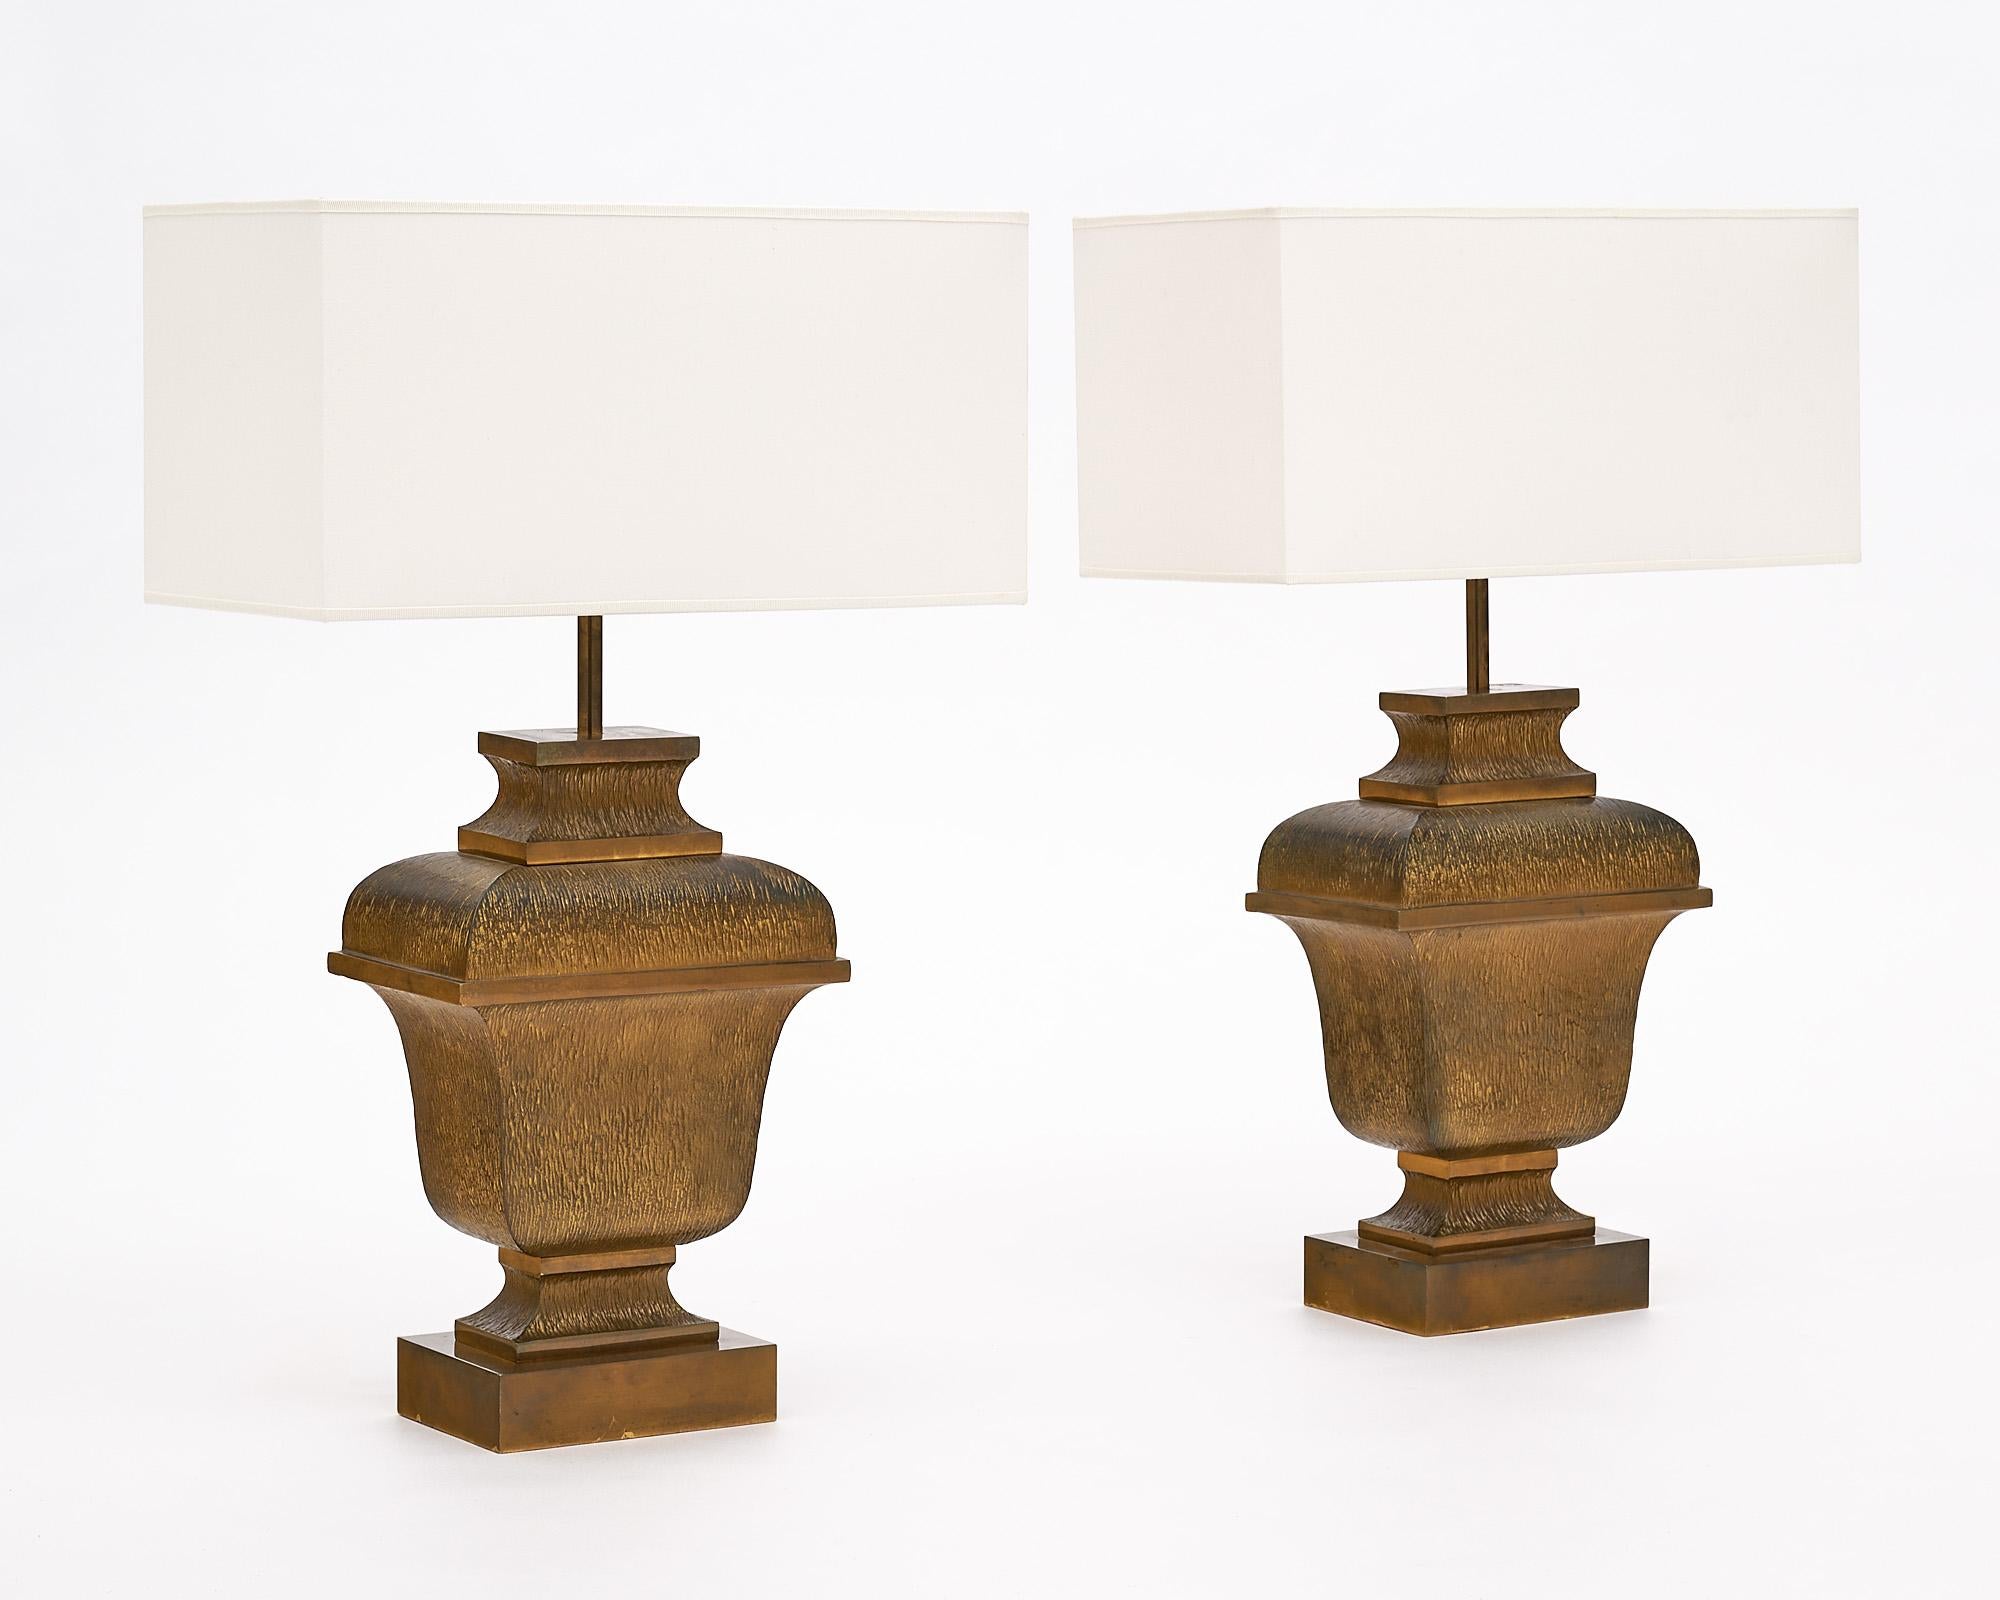 Pair of lamps from France by Maison Charles. This pair is sold brass, hand embossed. They have been newly wired to fit US standards.